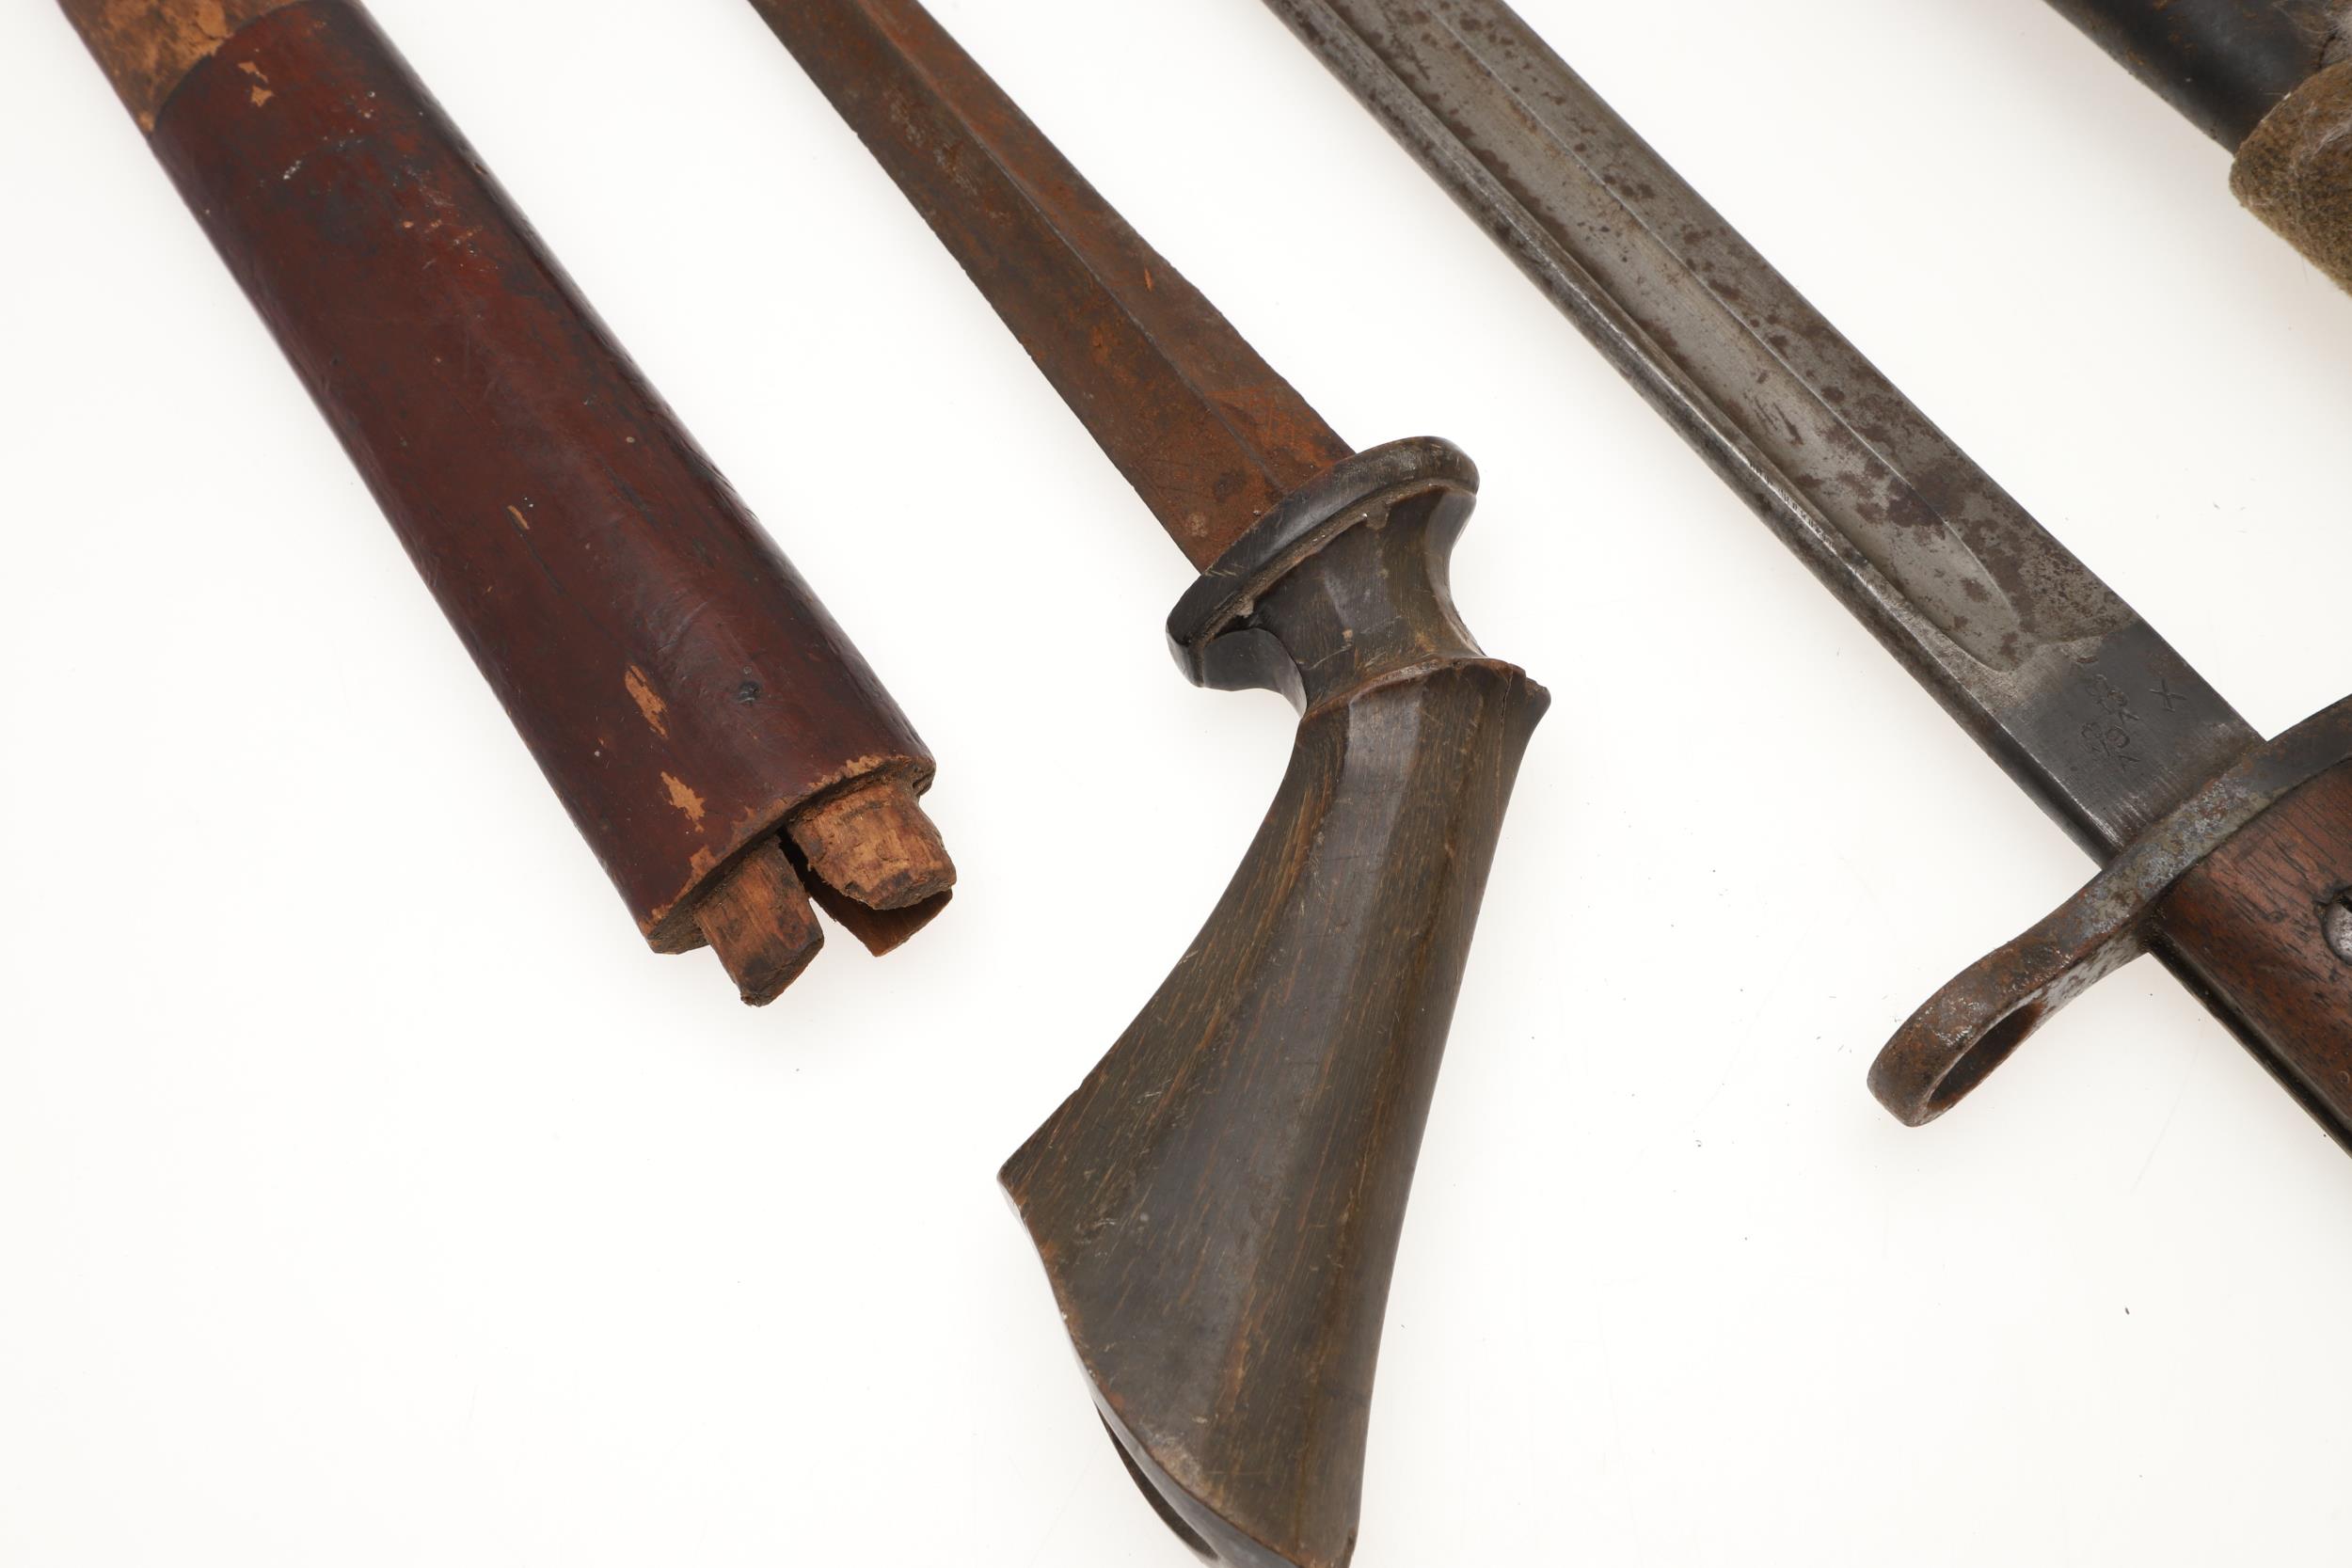 A 1913 PATTERN BAYONET AND A HORN HANDLED KNIFE. - Image 11 of 12